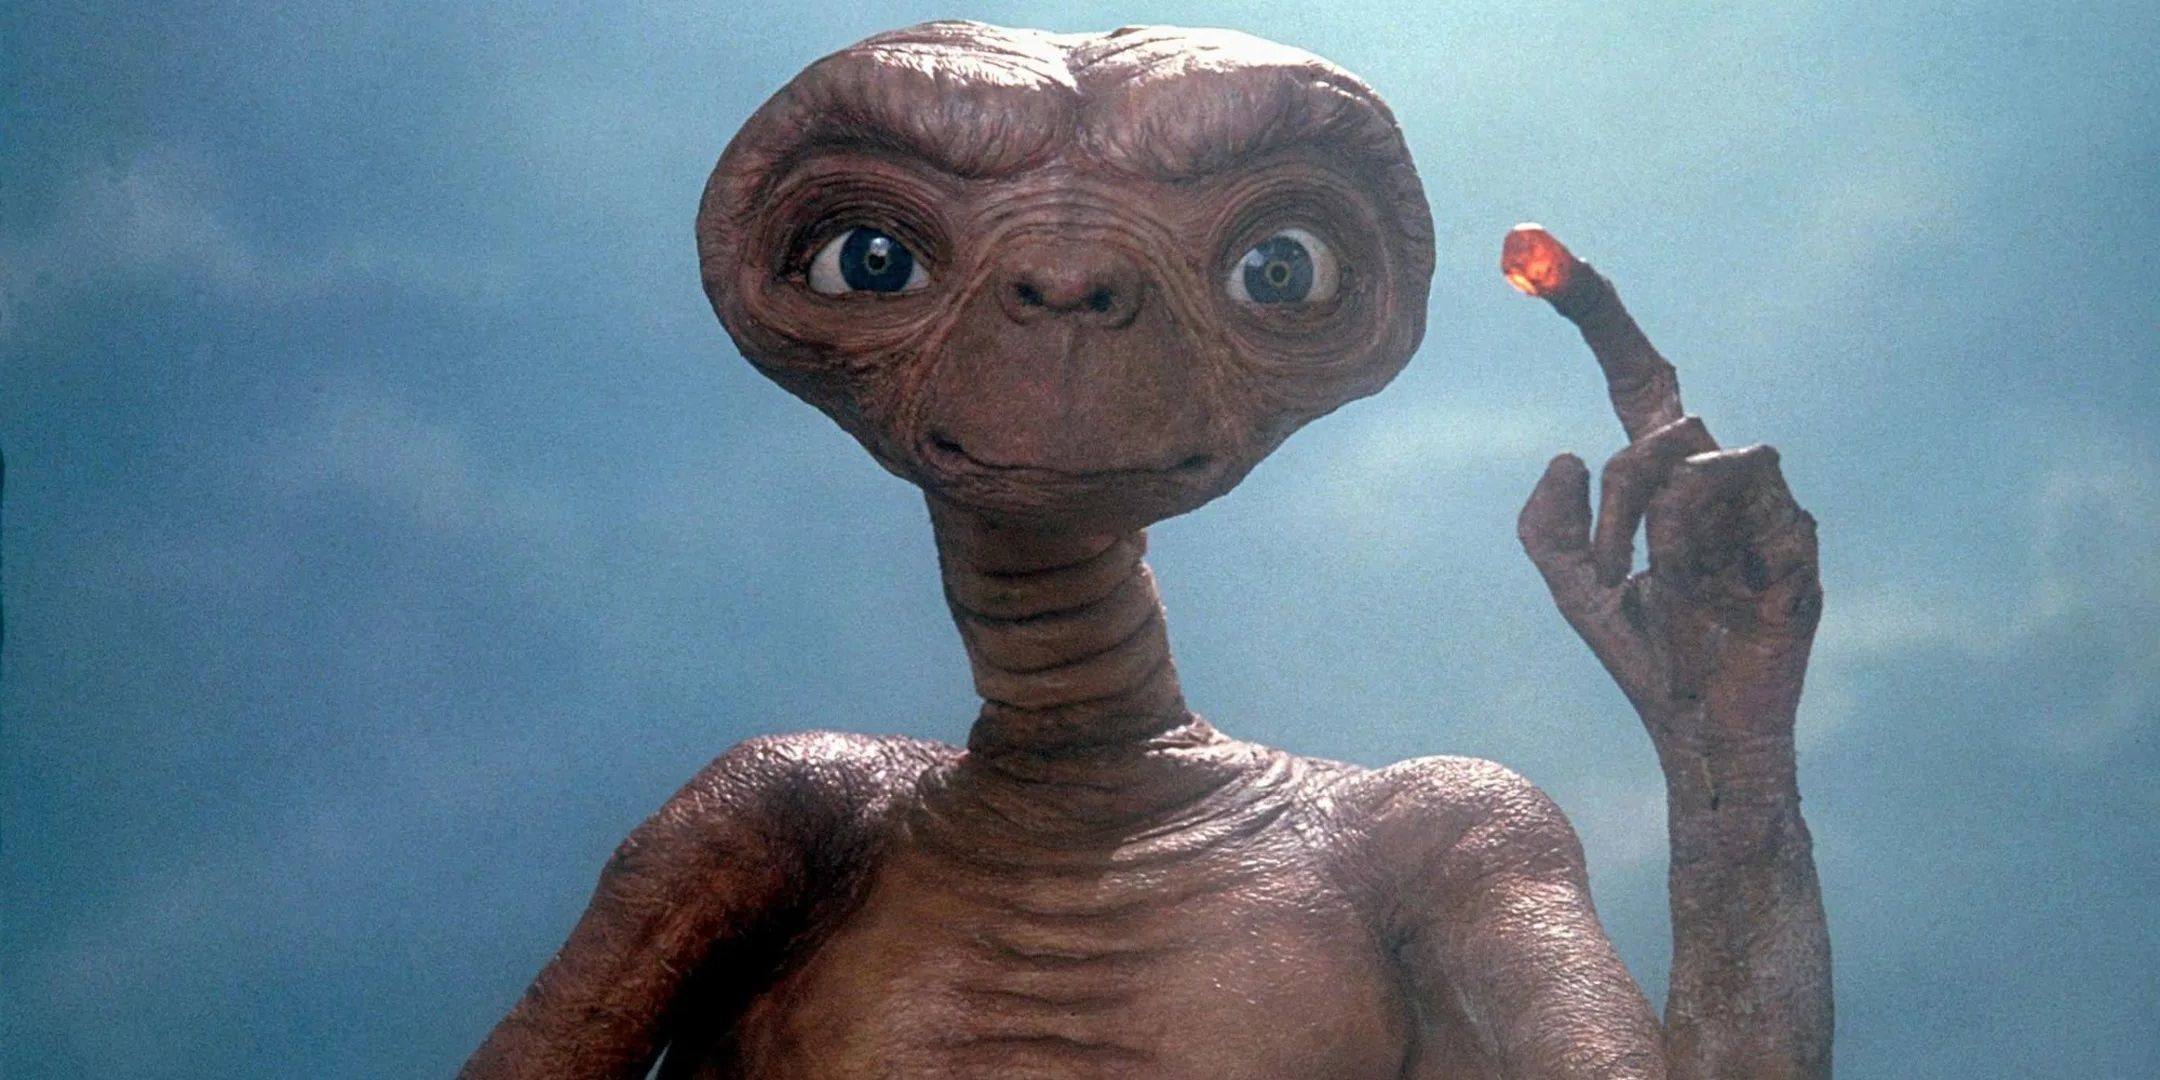 ET with his glowing fingertip